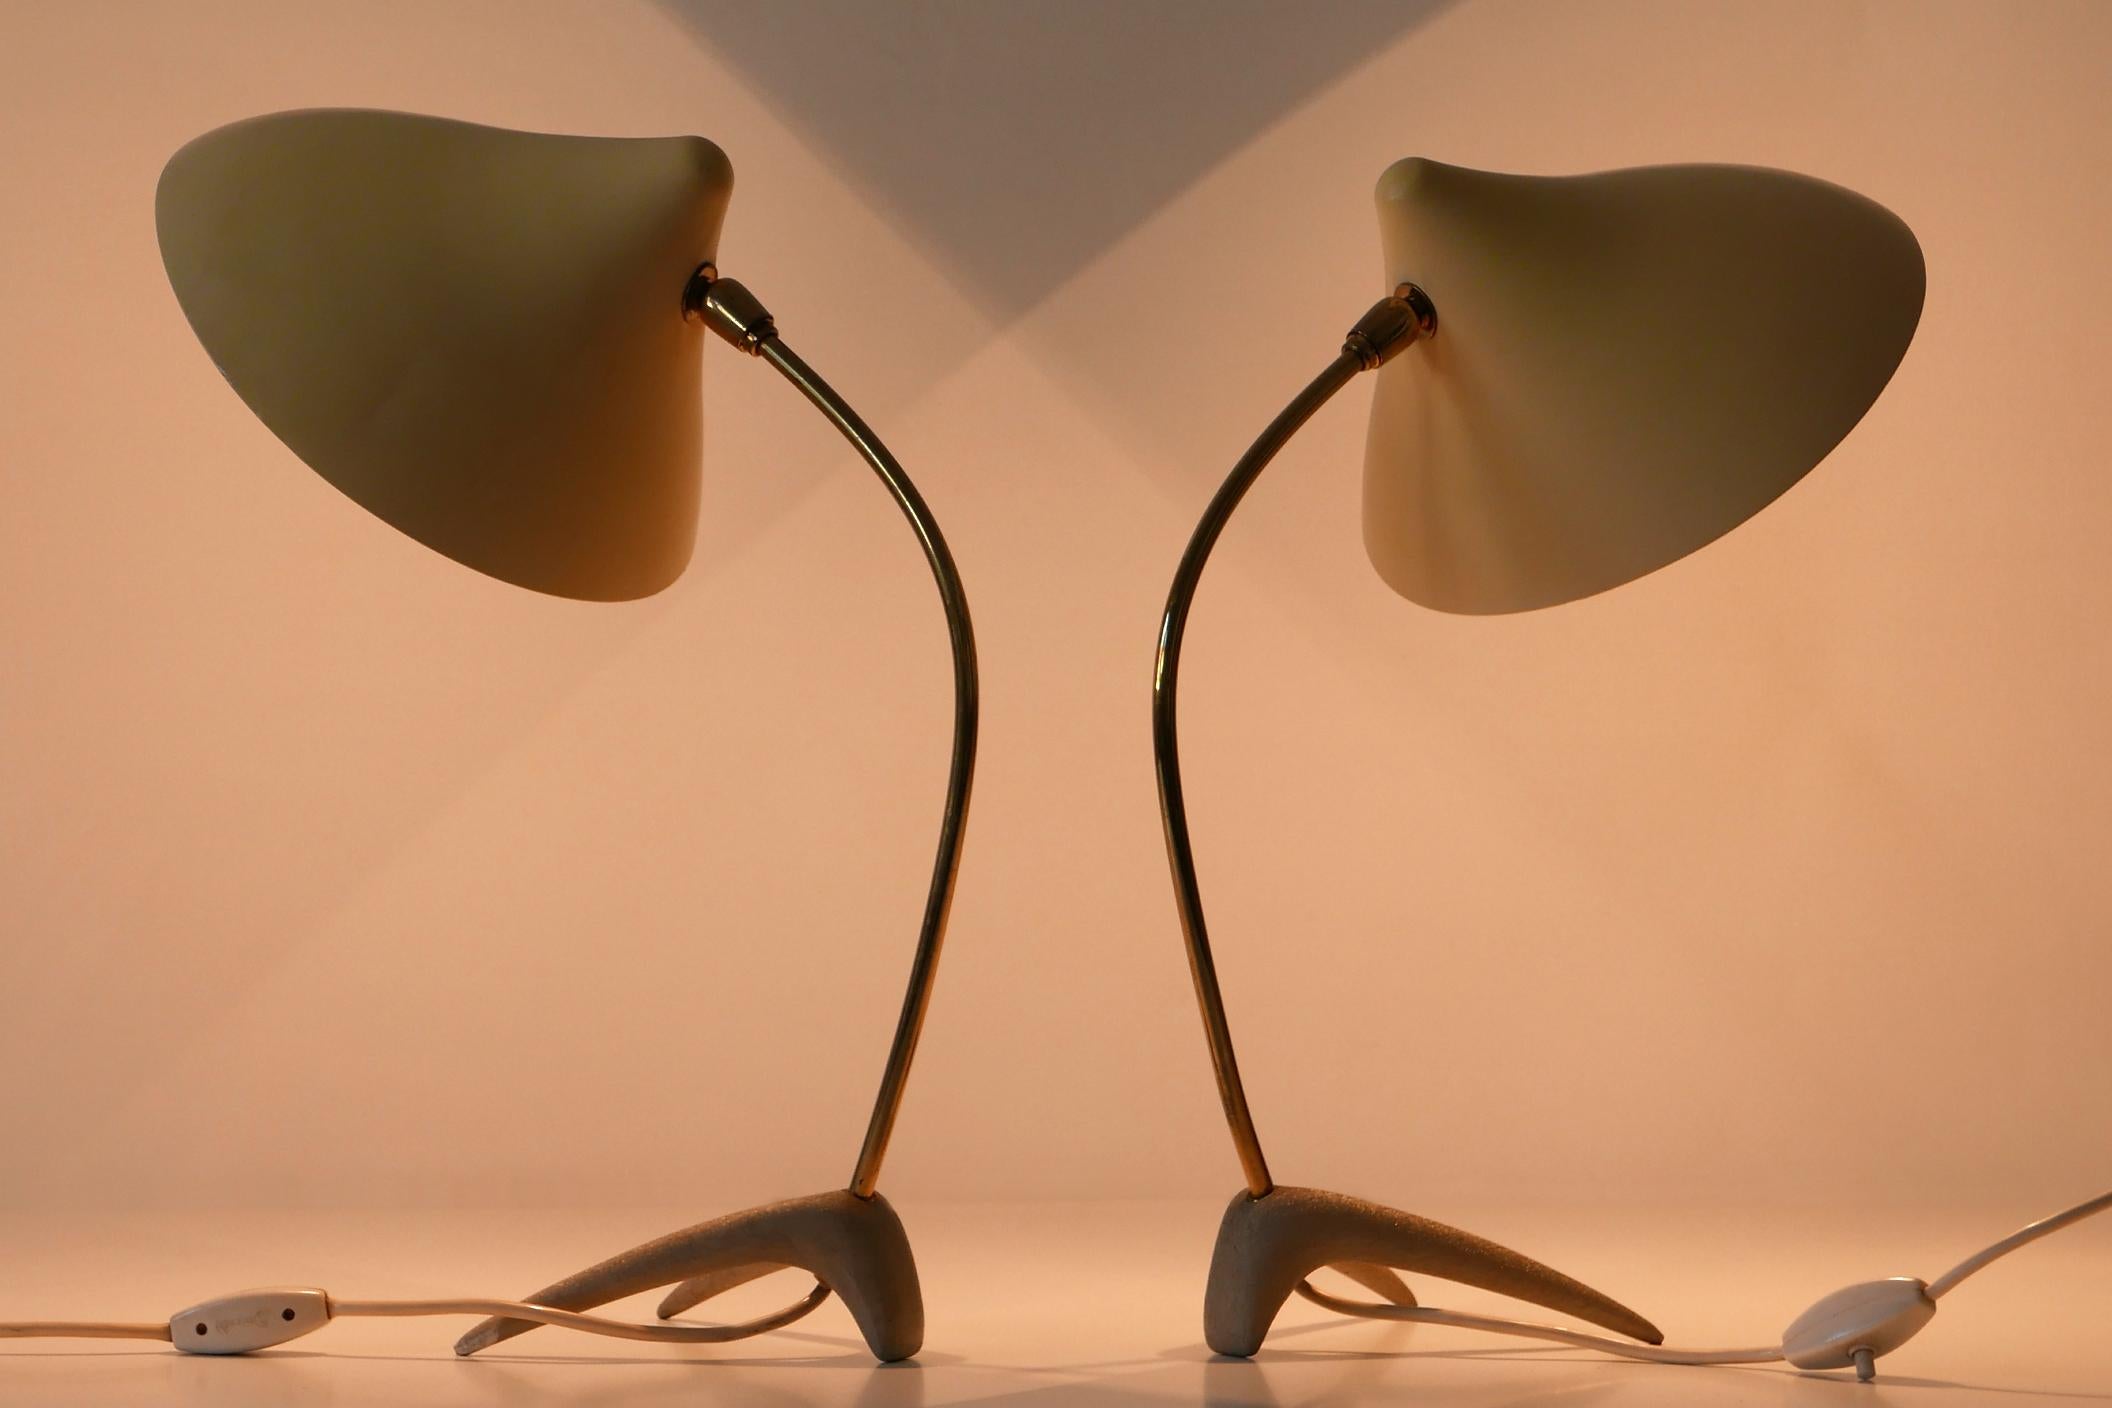 Set of Two Lovely Mid-Century Modern Table Lamps by Louis Kalff for Cosack 1950s For Sale 4